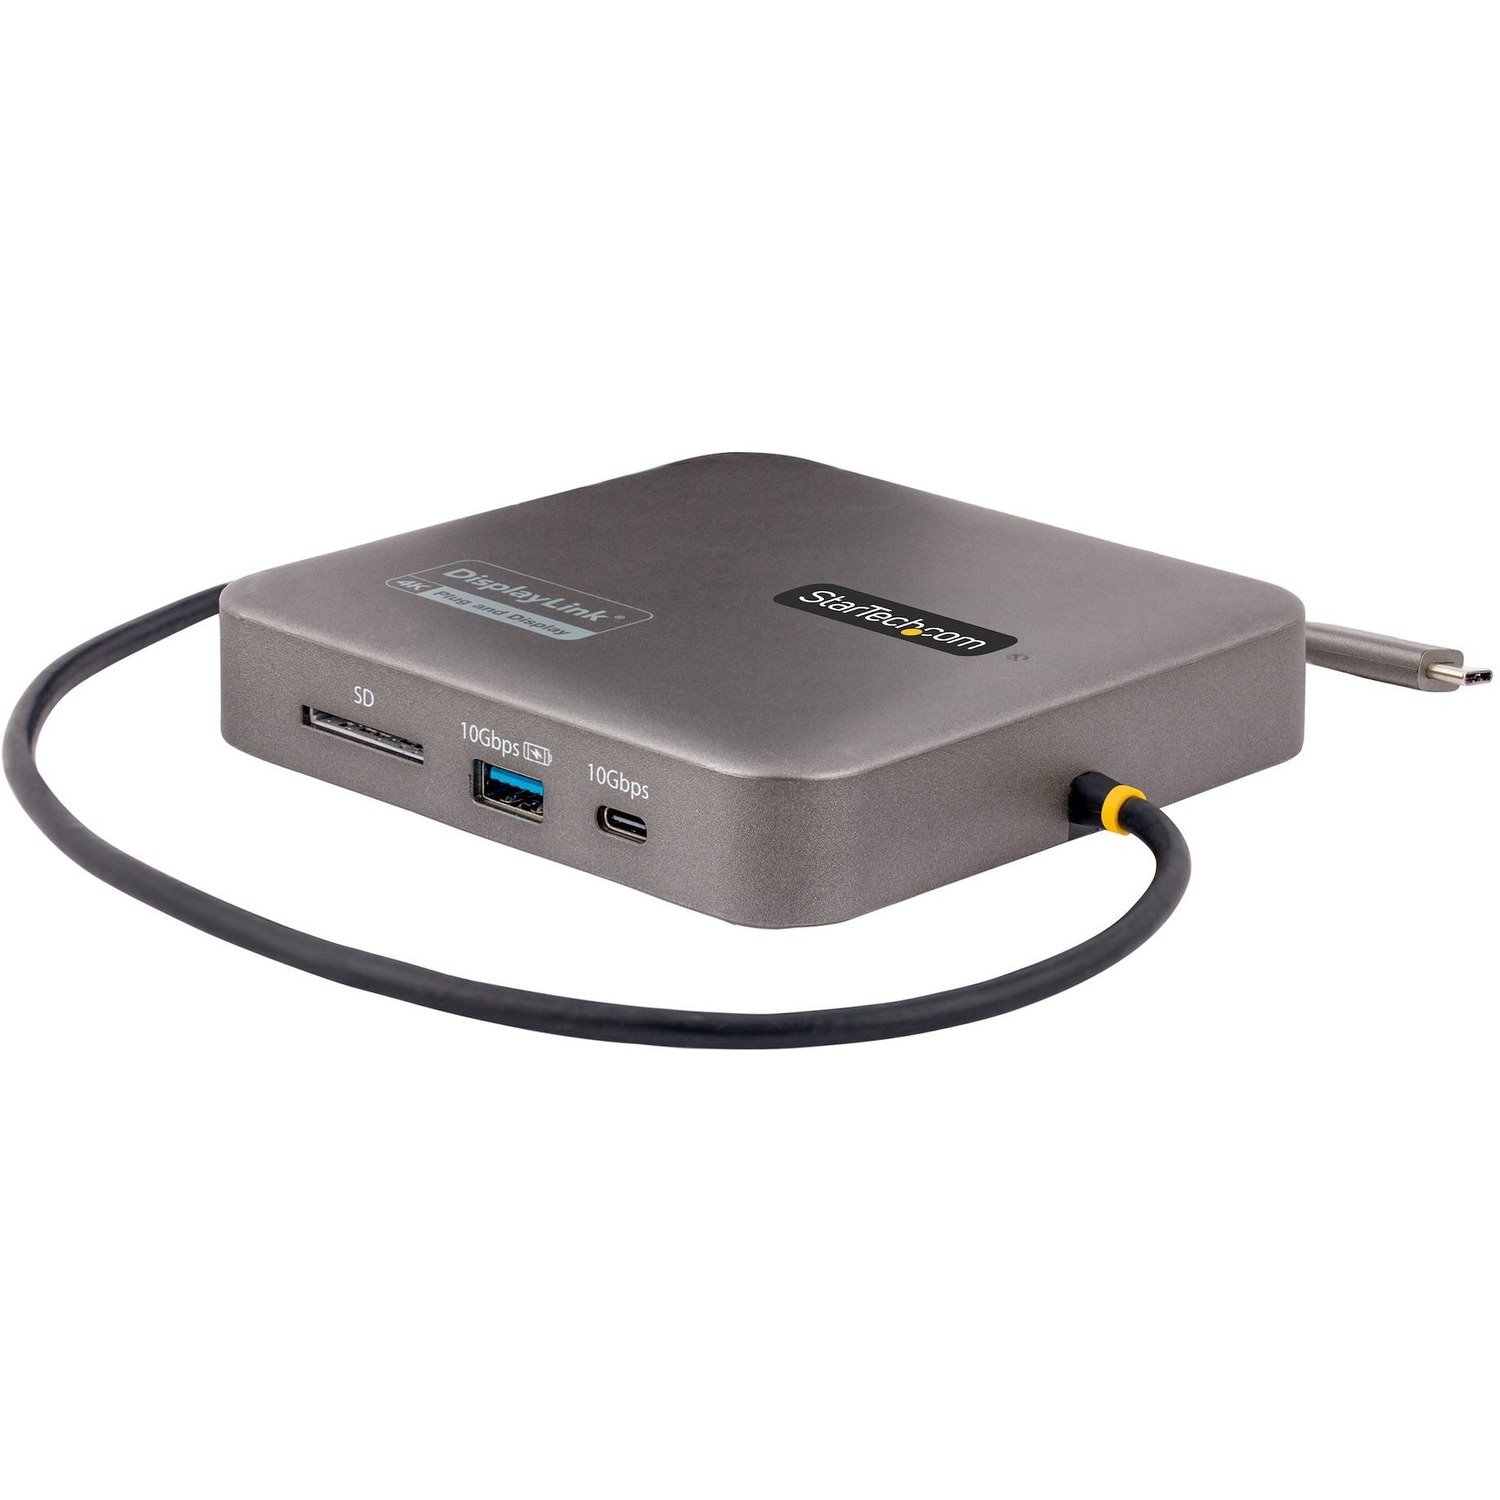 StarTech.com USB C Multiport Adapter, Dual HDMI Video, 4K 60Hz, 2-Port 10Gbps USB-A/USB-C 3.1 Hub, 100W USB Power Delivery Charging, GbE, SD, USB Type-C Mini Travel Dock, 12"/30cm Cable - Laptop Docking Station